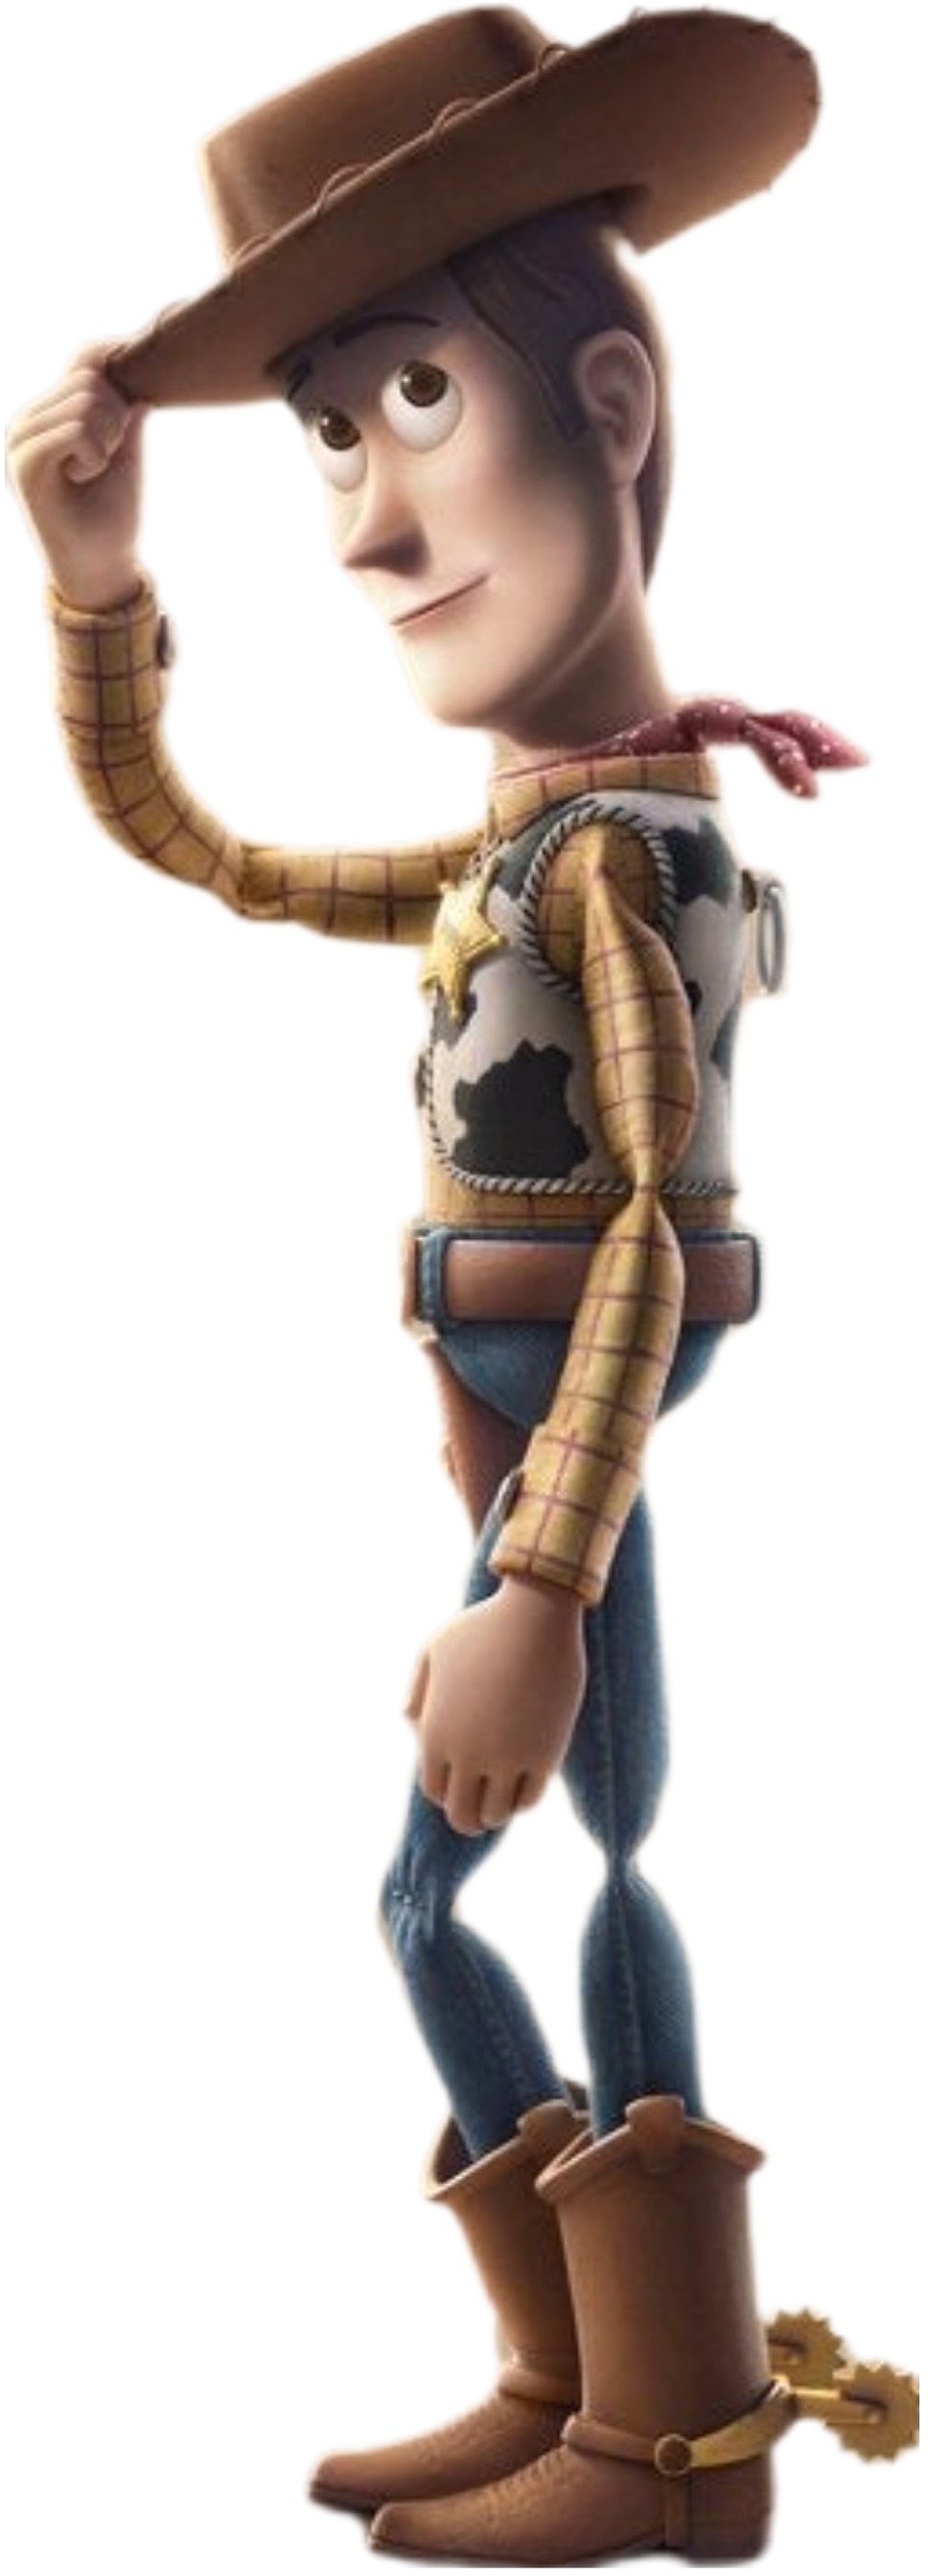 Woody (A Toy Story)